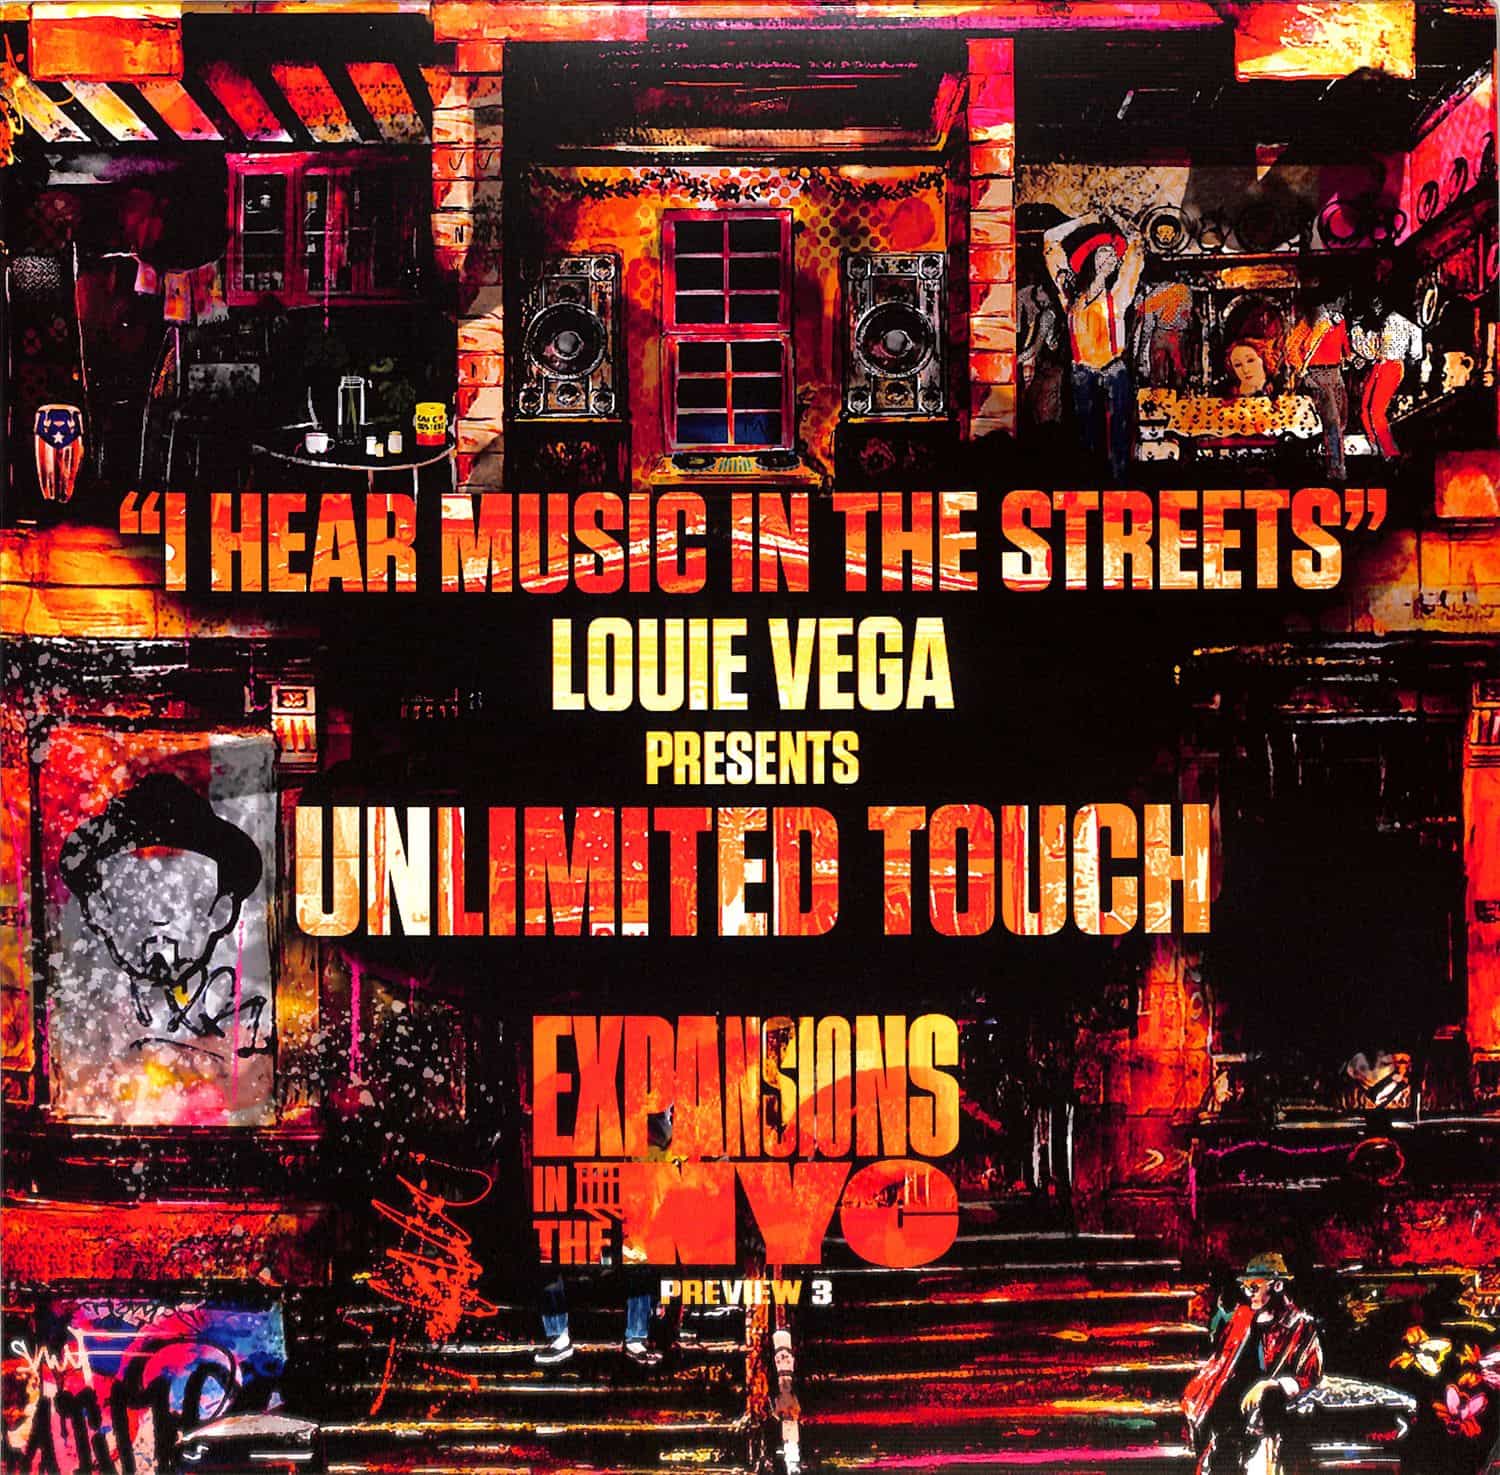 Louie Vega presents Unlimited Touch - I HEAR MUSIC IN THE STREETS 